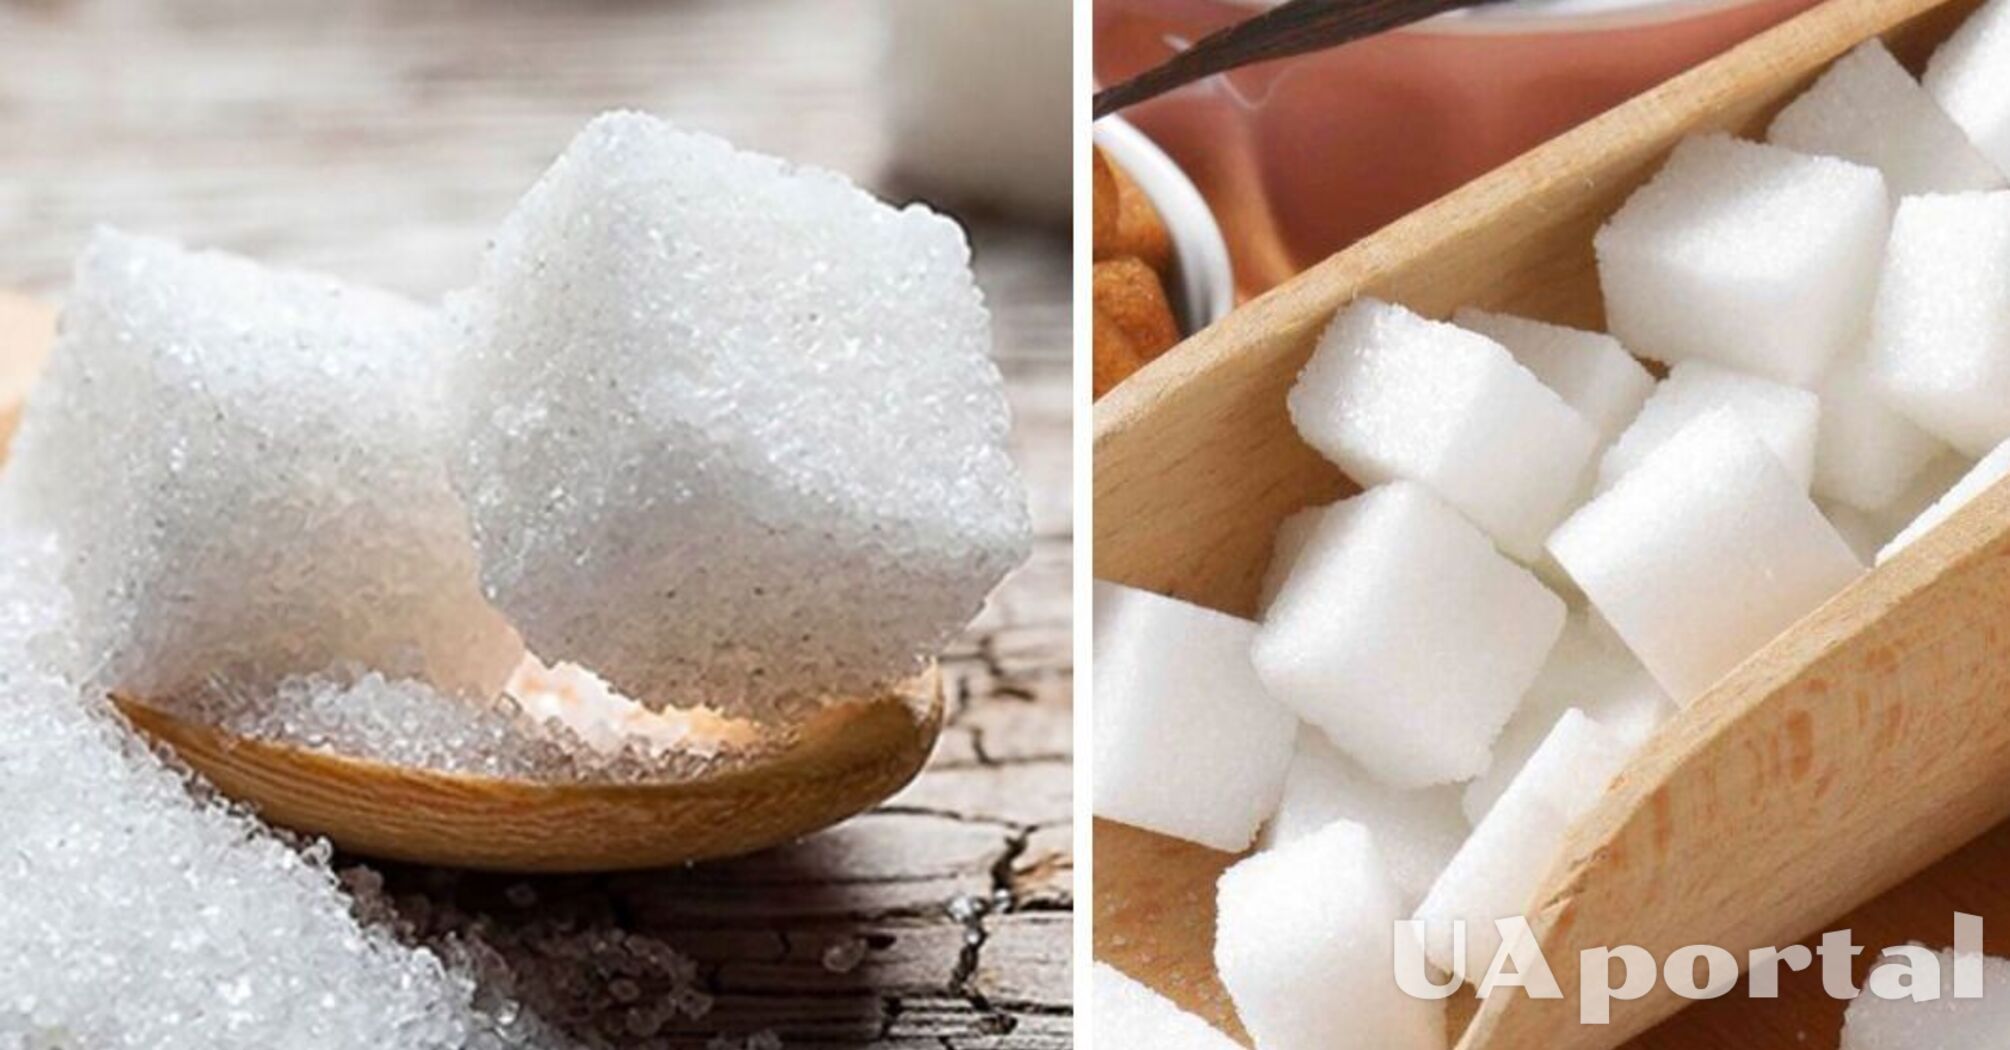 How much sugar should you eat a day to avoid harming your body